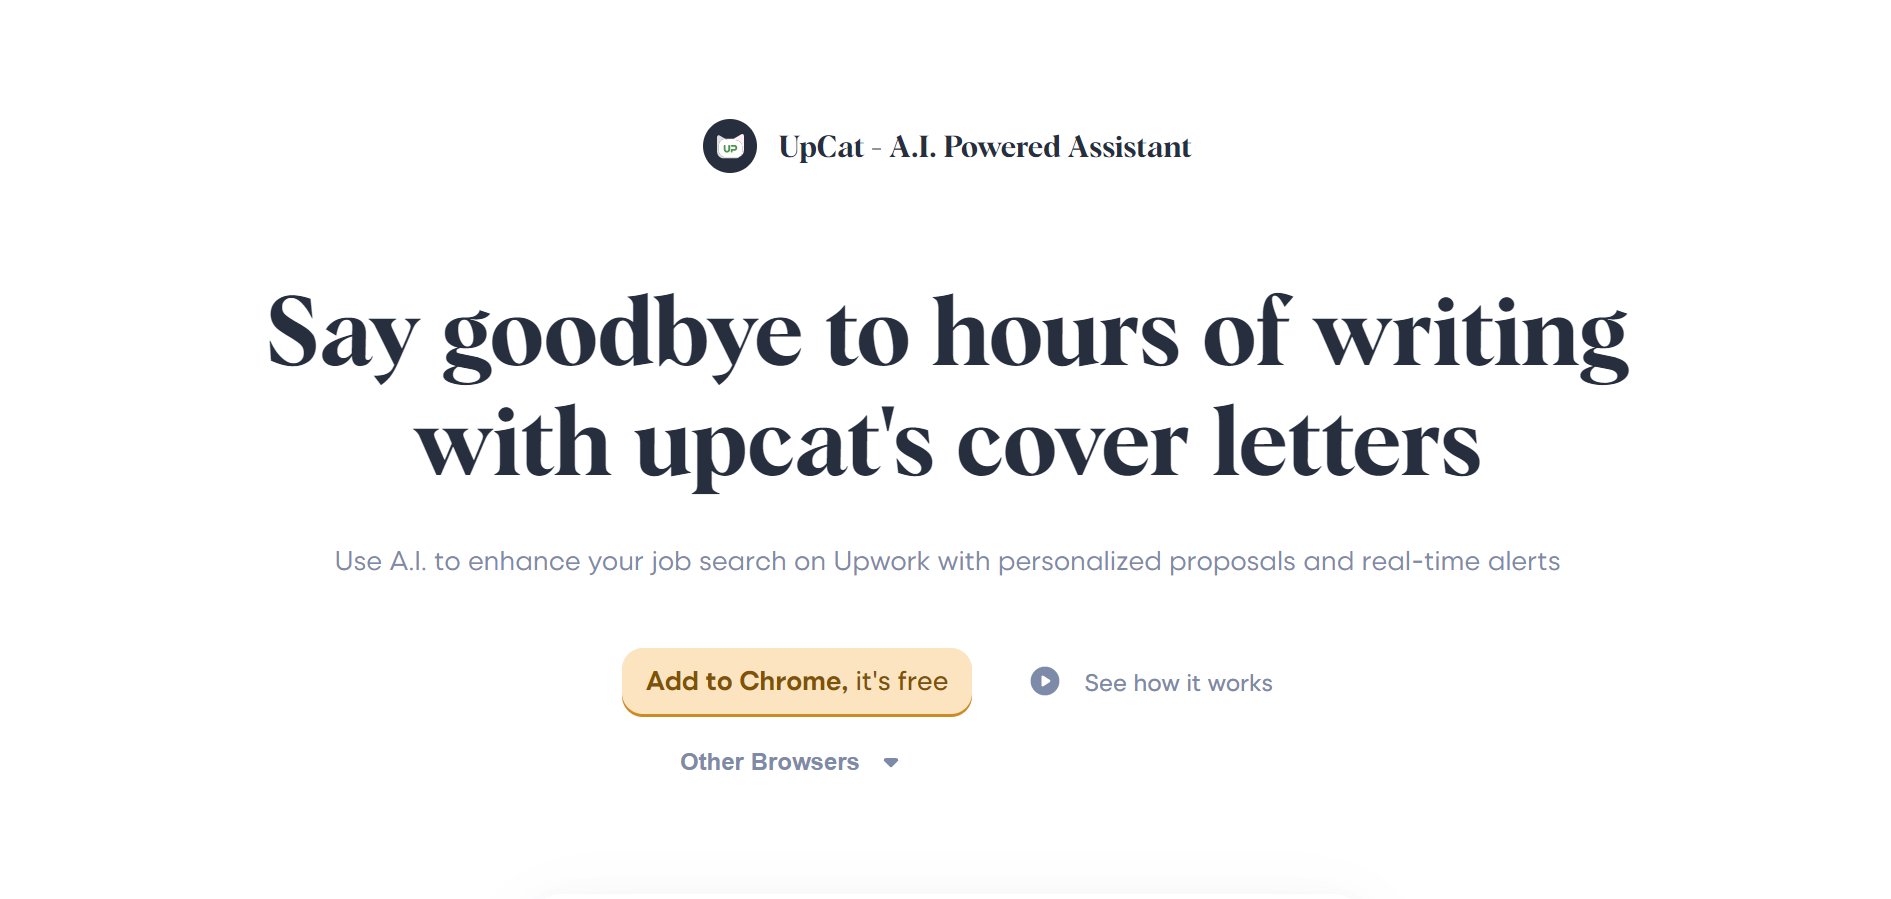 Get Hired Faster with Upcat.app: The Ultimate AI-Powered Job Search Tool for Upwork!